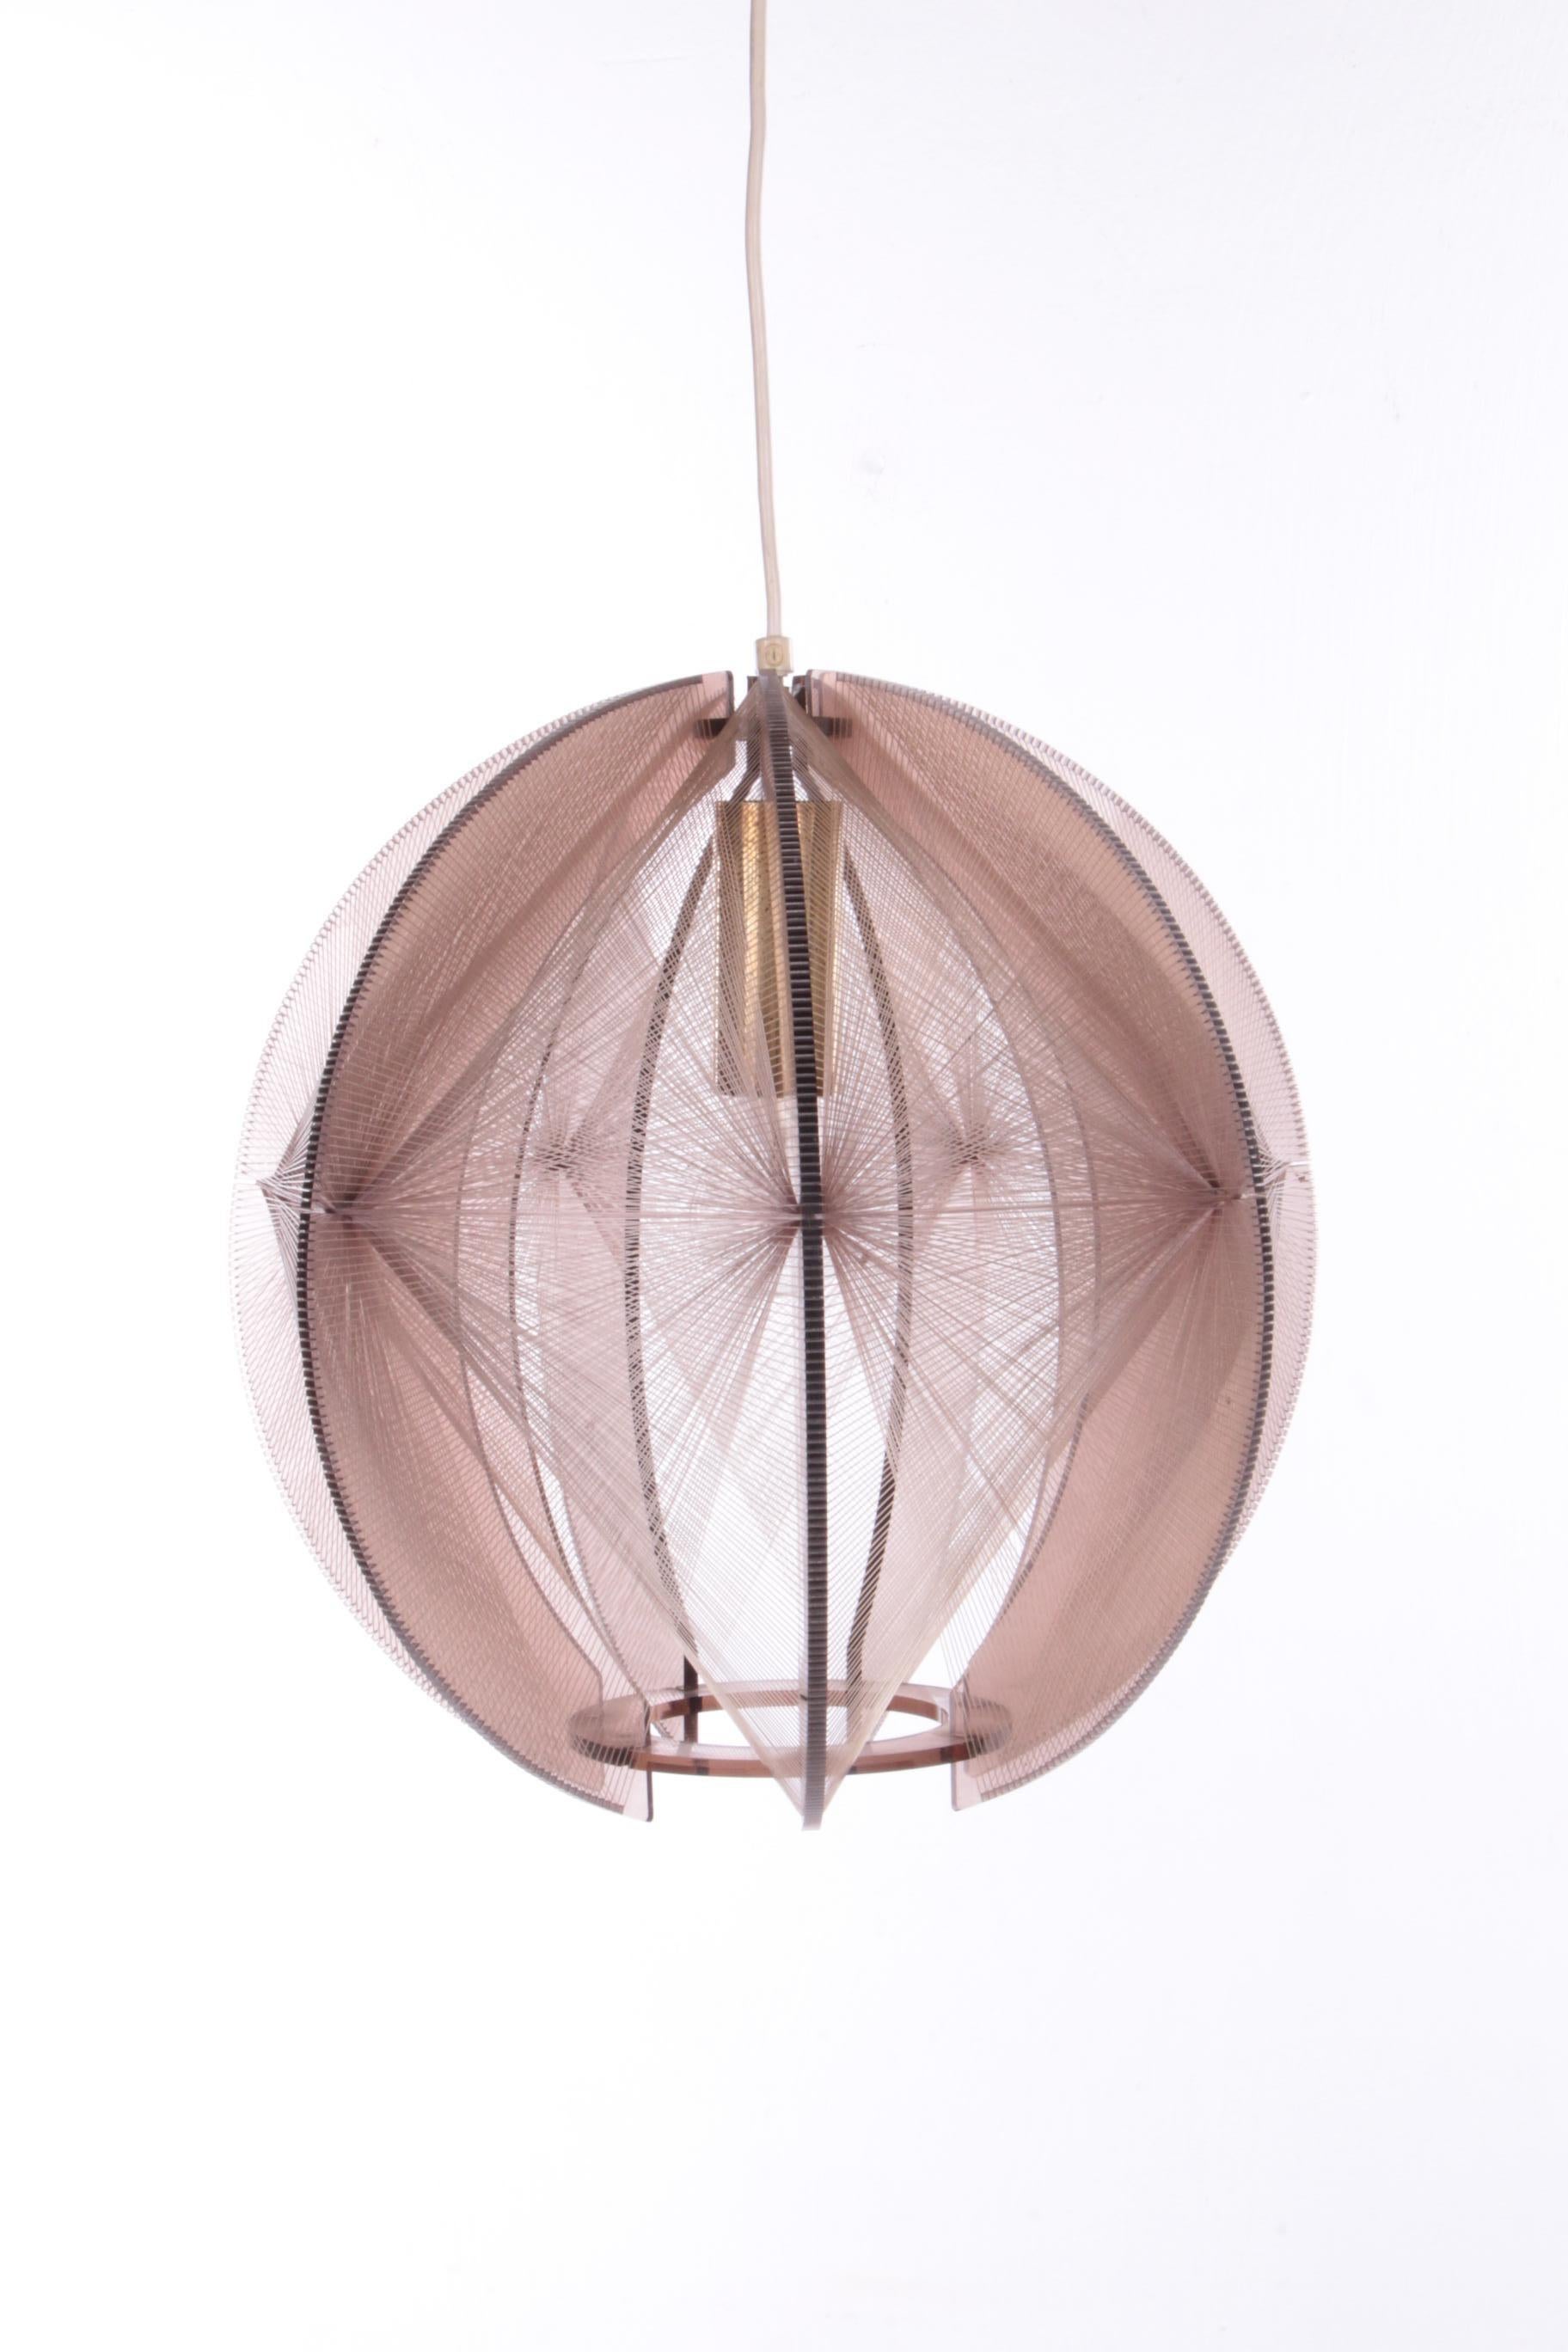 Vintage Paul Secon Spider Web Hanging Lamp, 1960, Germany.


A beautiful ceiling lamp from the 1960s, designed for Sompex by the French designer Paul Secon. Made in Germany

The lamp has a smoked glass colored Plexiglas frame with threaded nylon